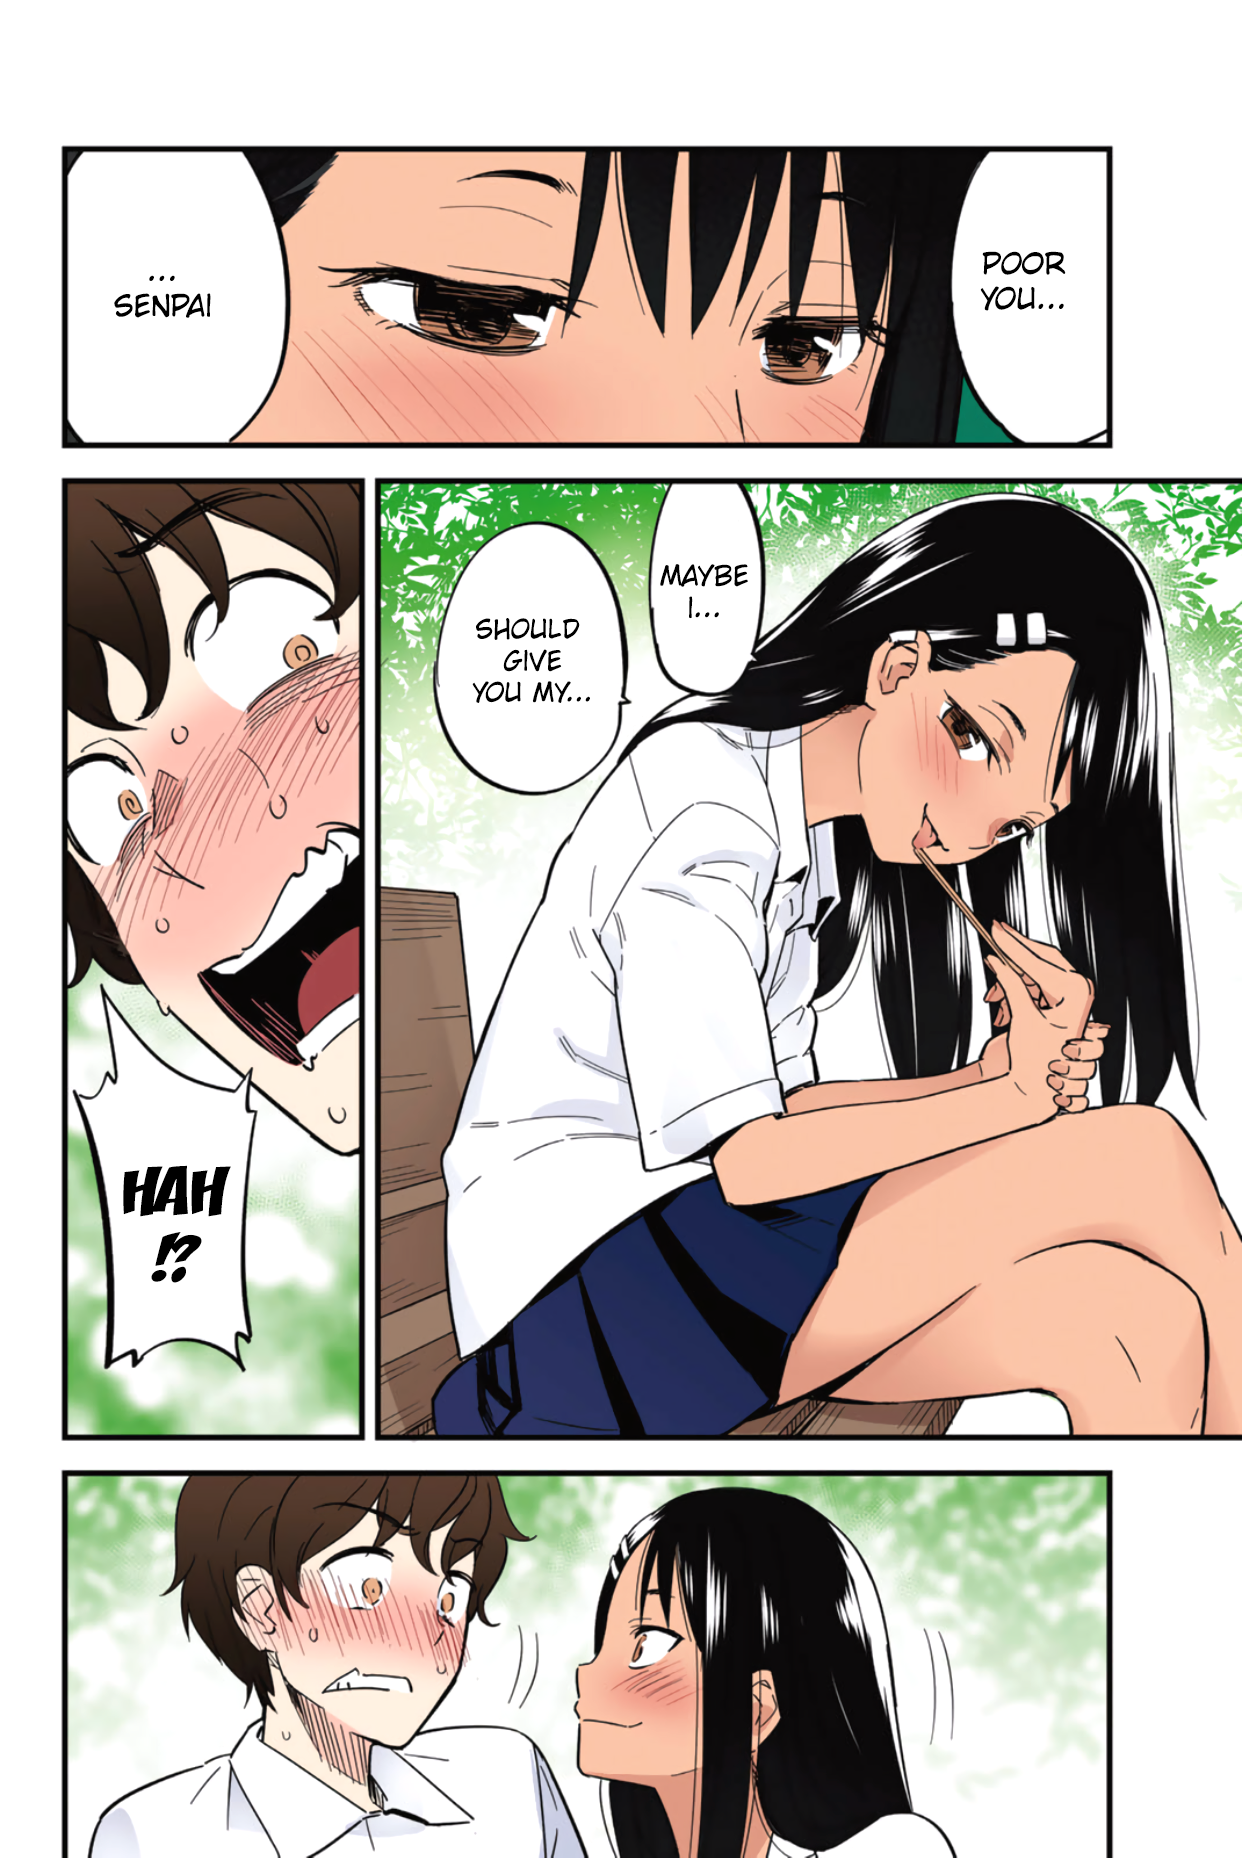 Ijiranaide, Nagatoro-San Vol.2 Chapter 14.3: Colored Omake 1: Don't You Want To Do It Too, Senpai? - Picture 3